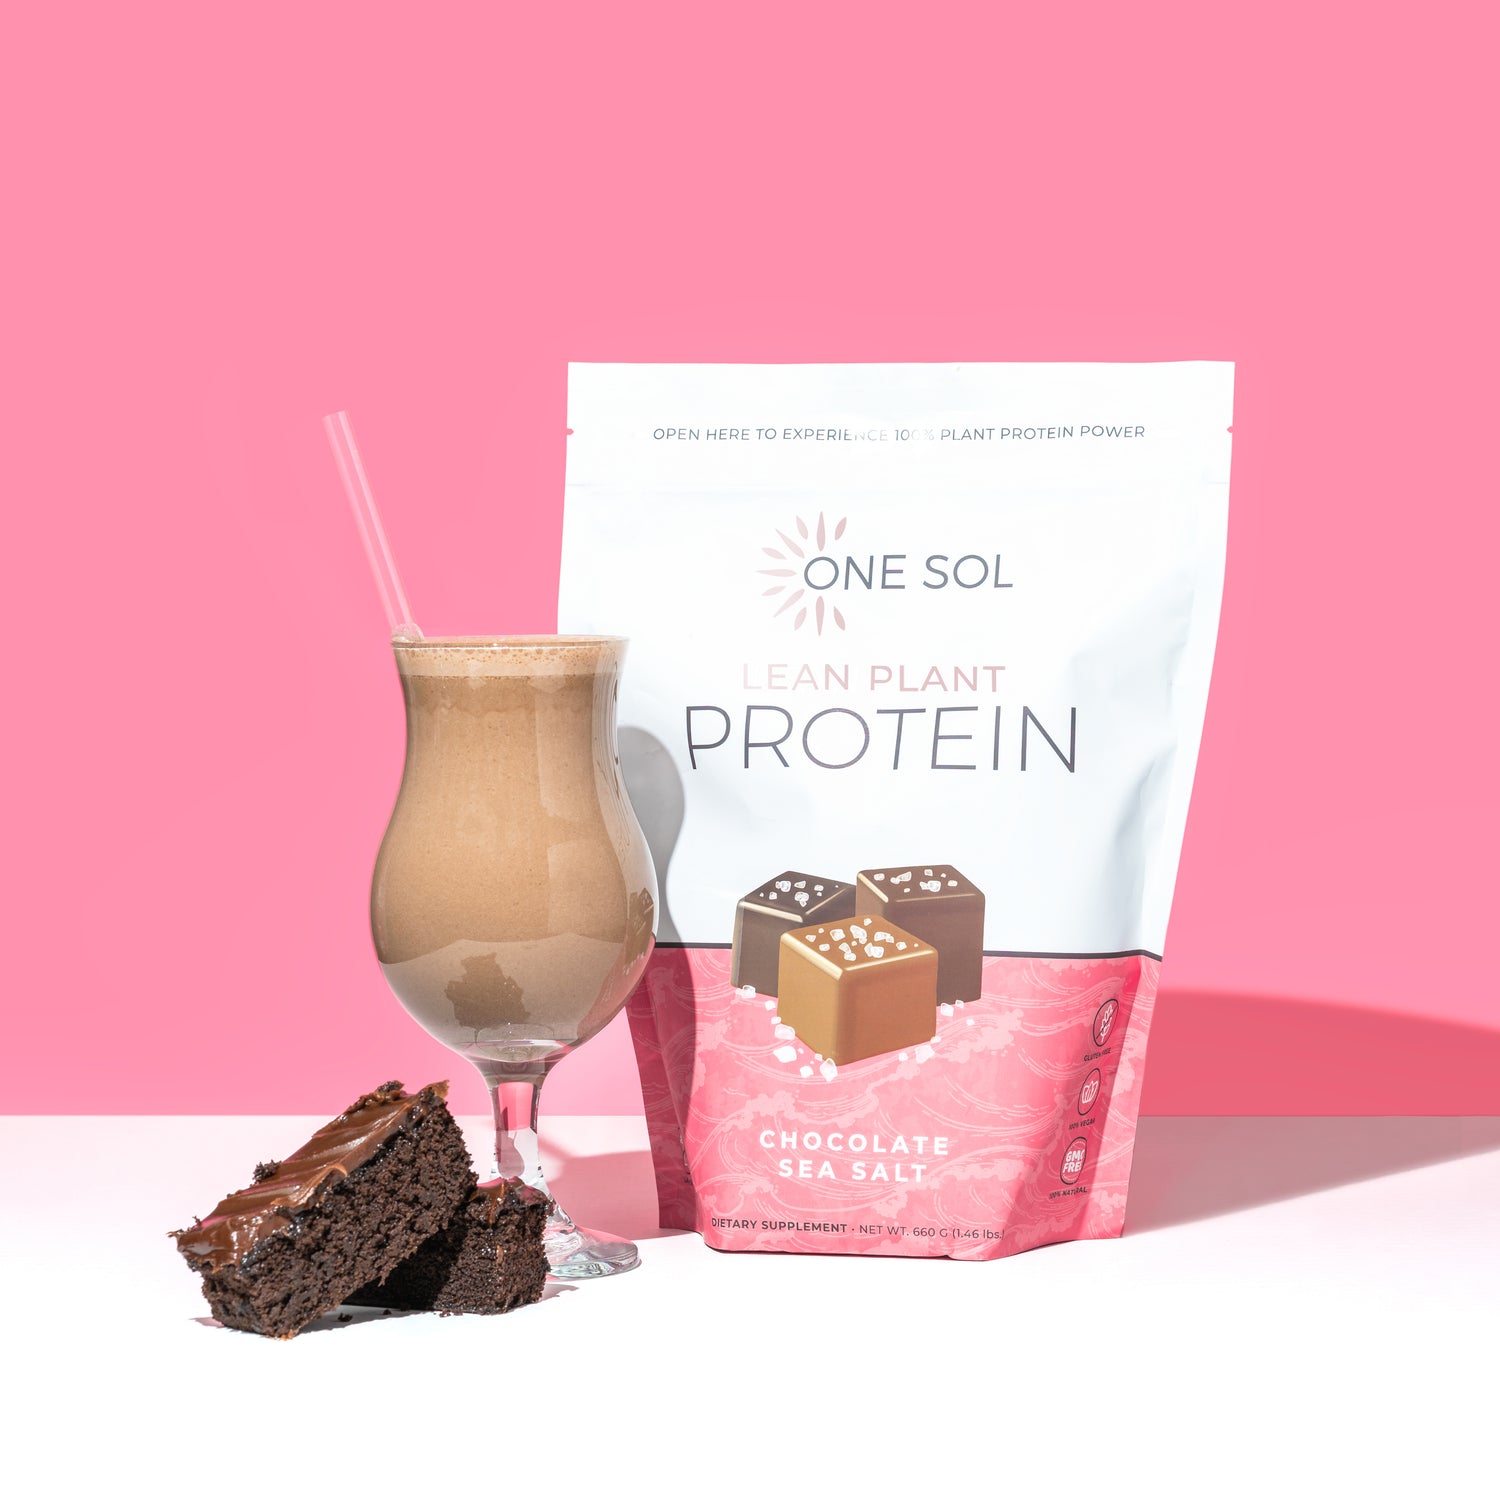 One Sol Lean Plant Protein Powder Horchata, Low Carb, Gluten Free, Lactose-Free